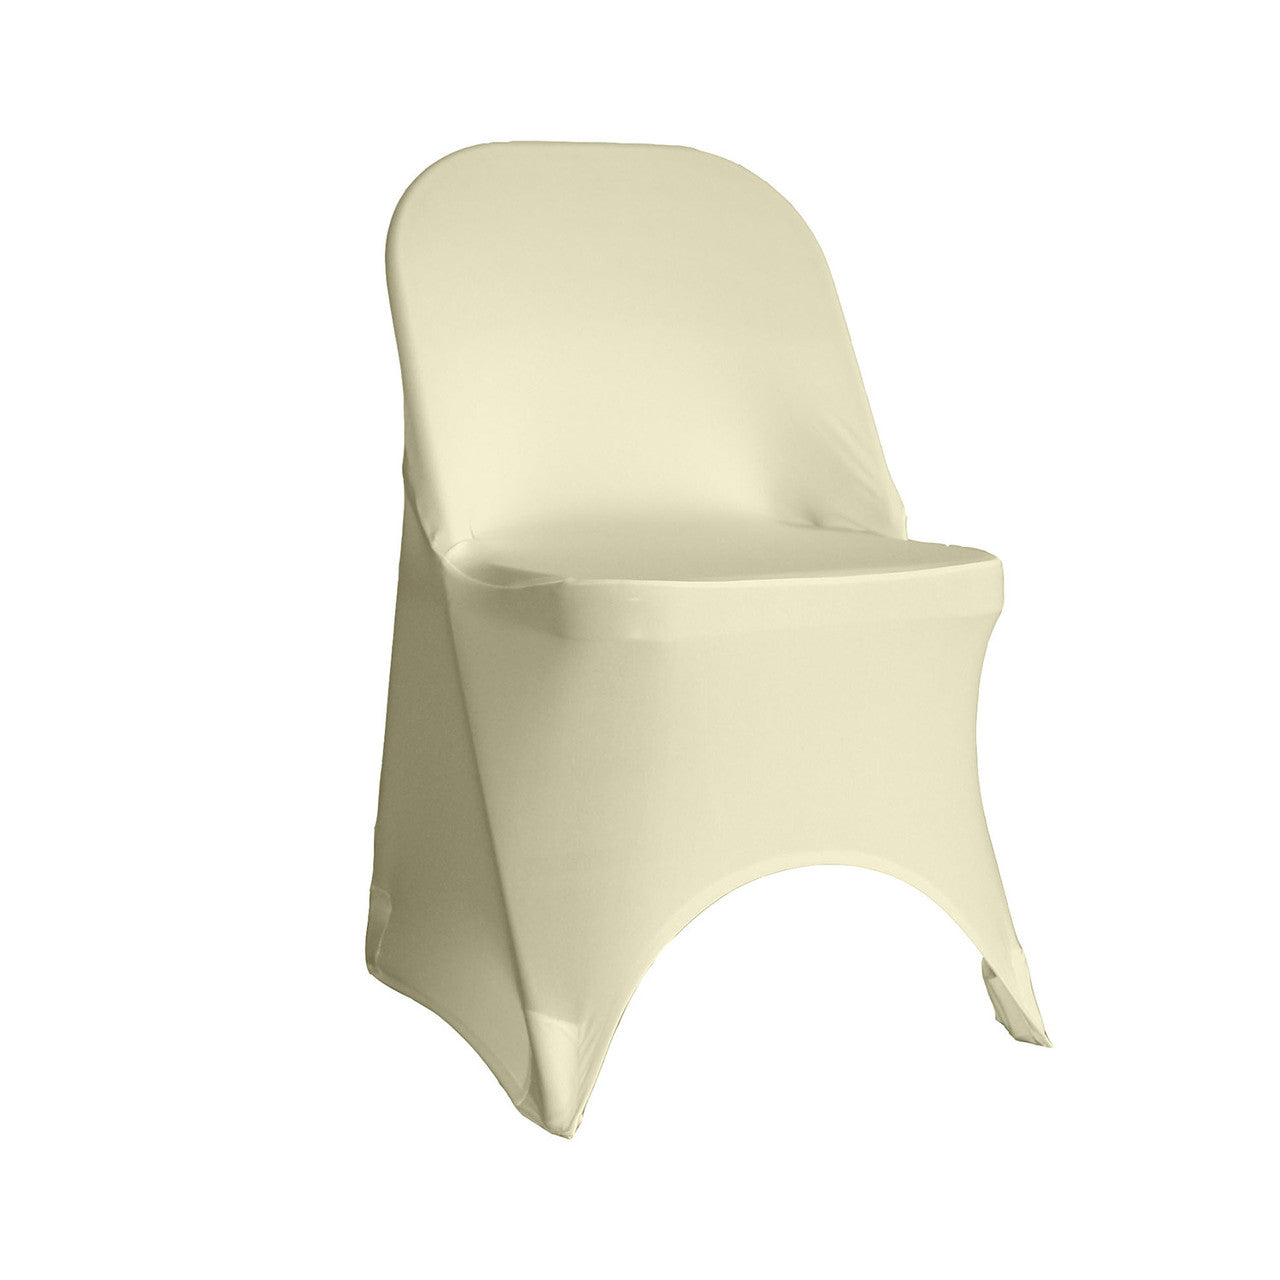 Spandex Folding Chair Cover in Champagne – Urquid Linen